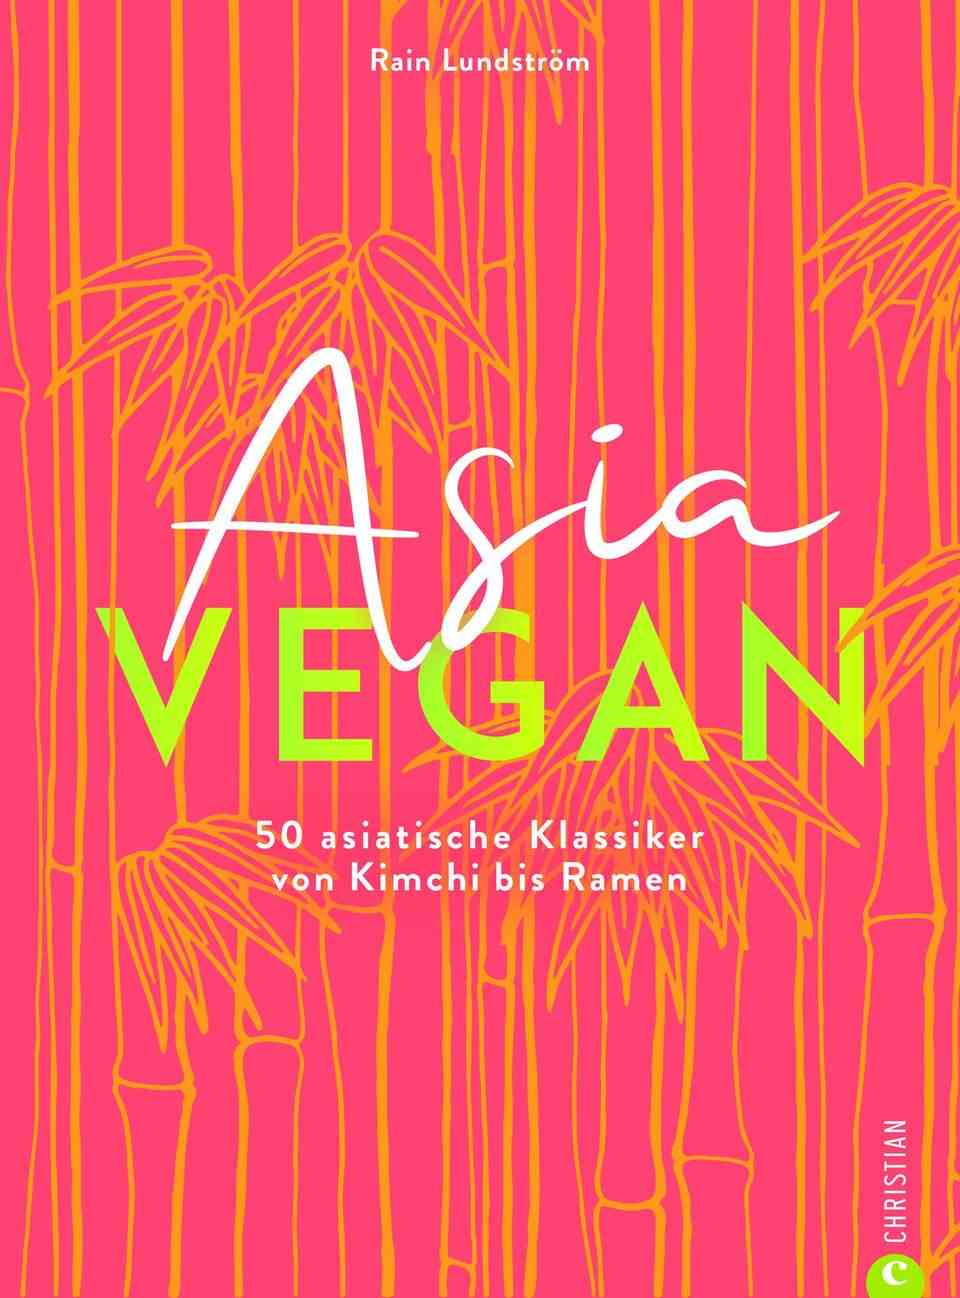 You can find more vegan Asian recipes here: "Asian Vegan" by Rain Lundstrom.  Christian publisher.  160 pages.  19.99 euros.